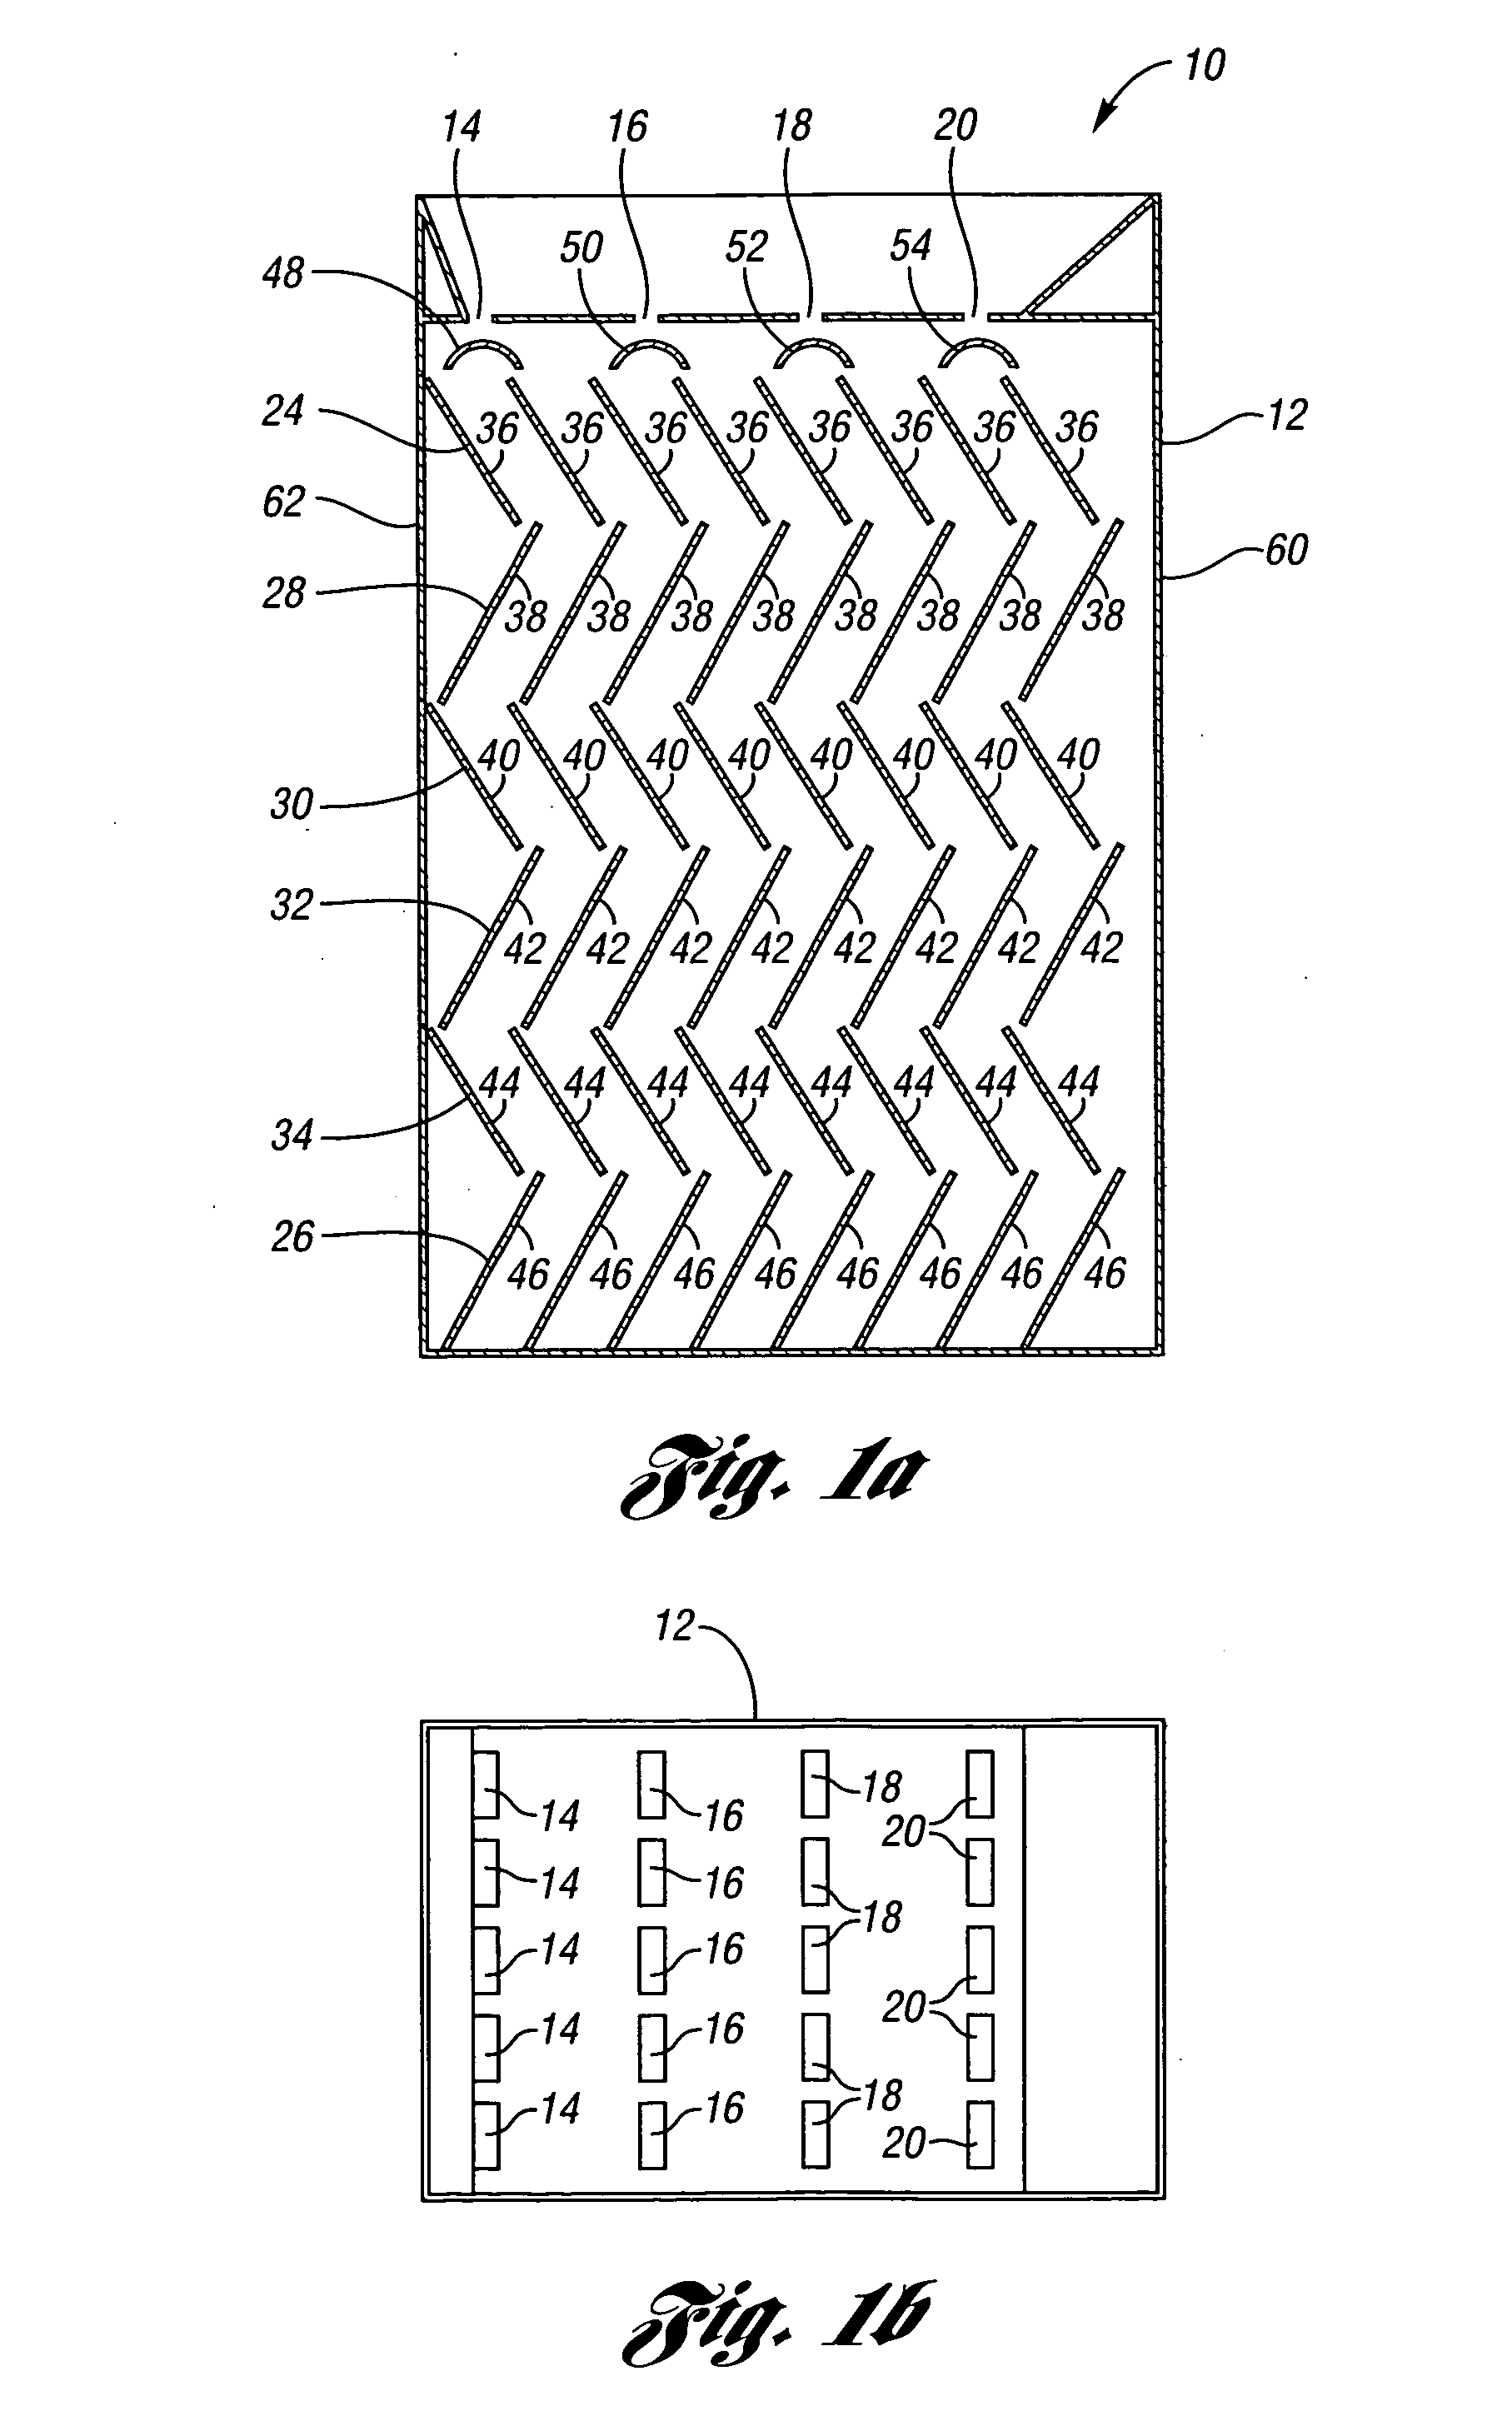 Baffle assembly module for vertical staged polymerization reactors